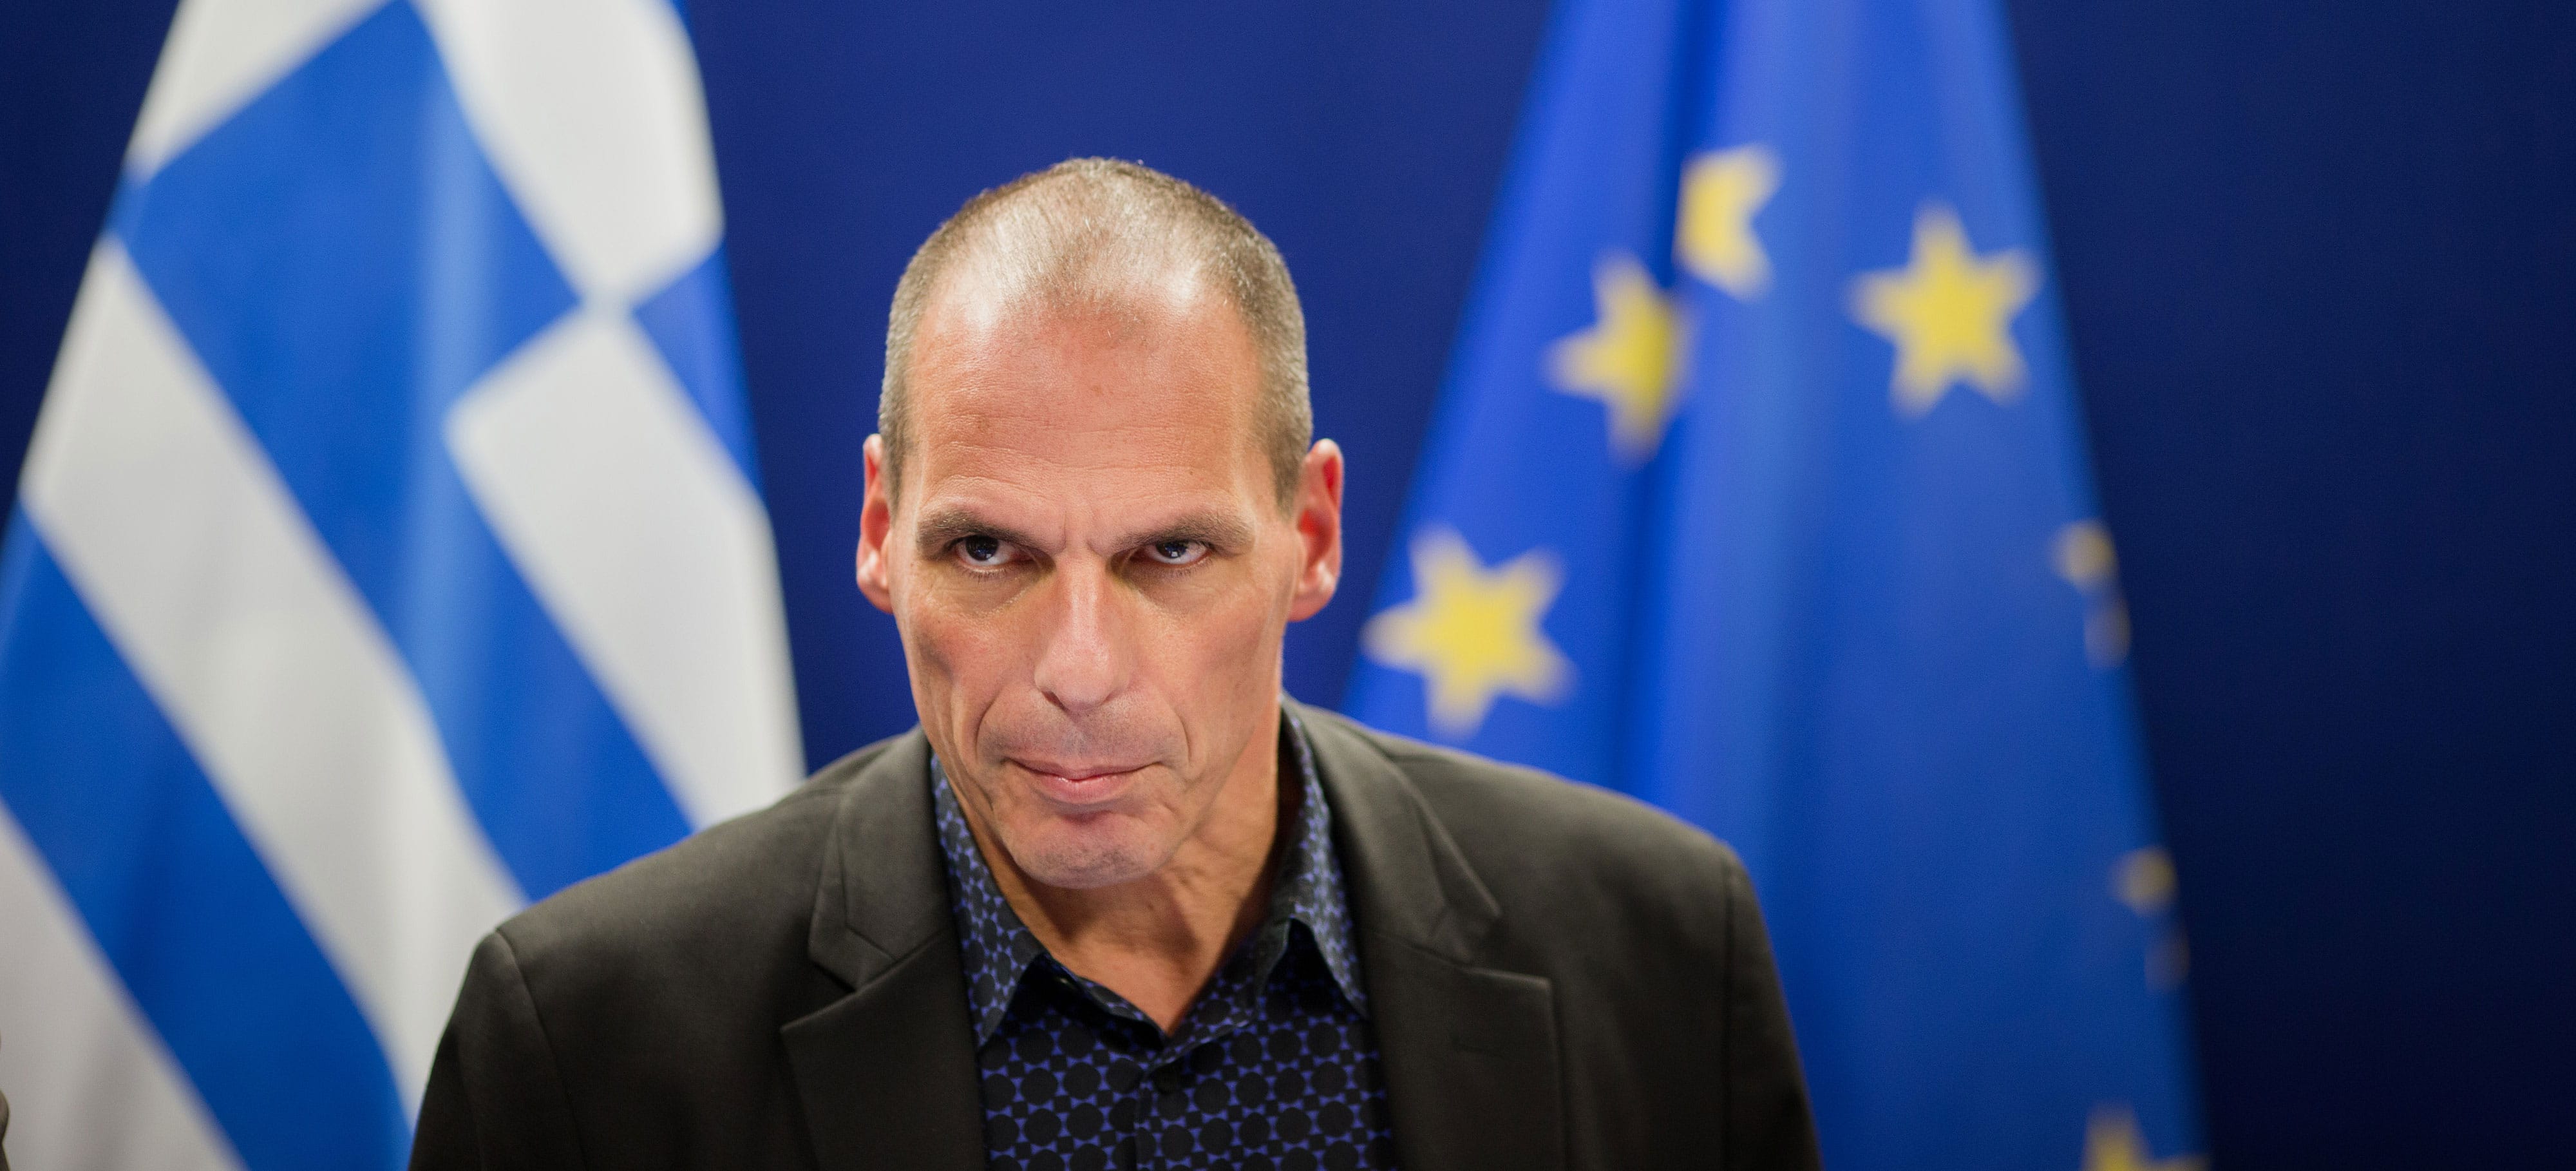 Greece’s Tsipras, Varoufakis Going All-In on Sunday’s ‘NO’ Vote